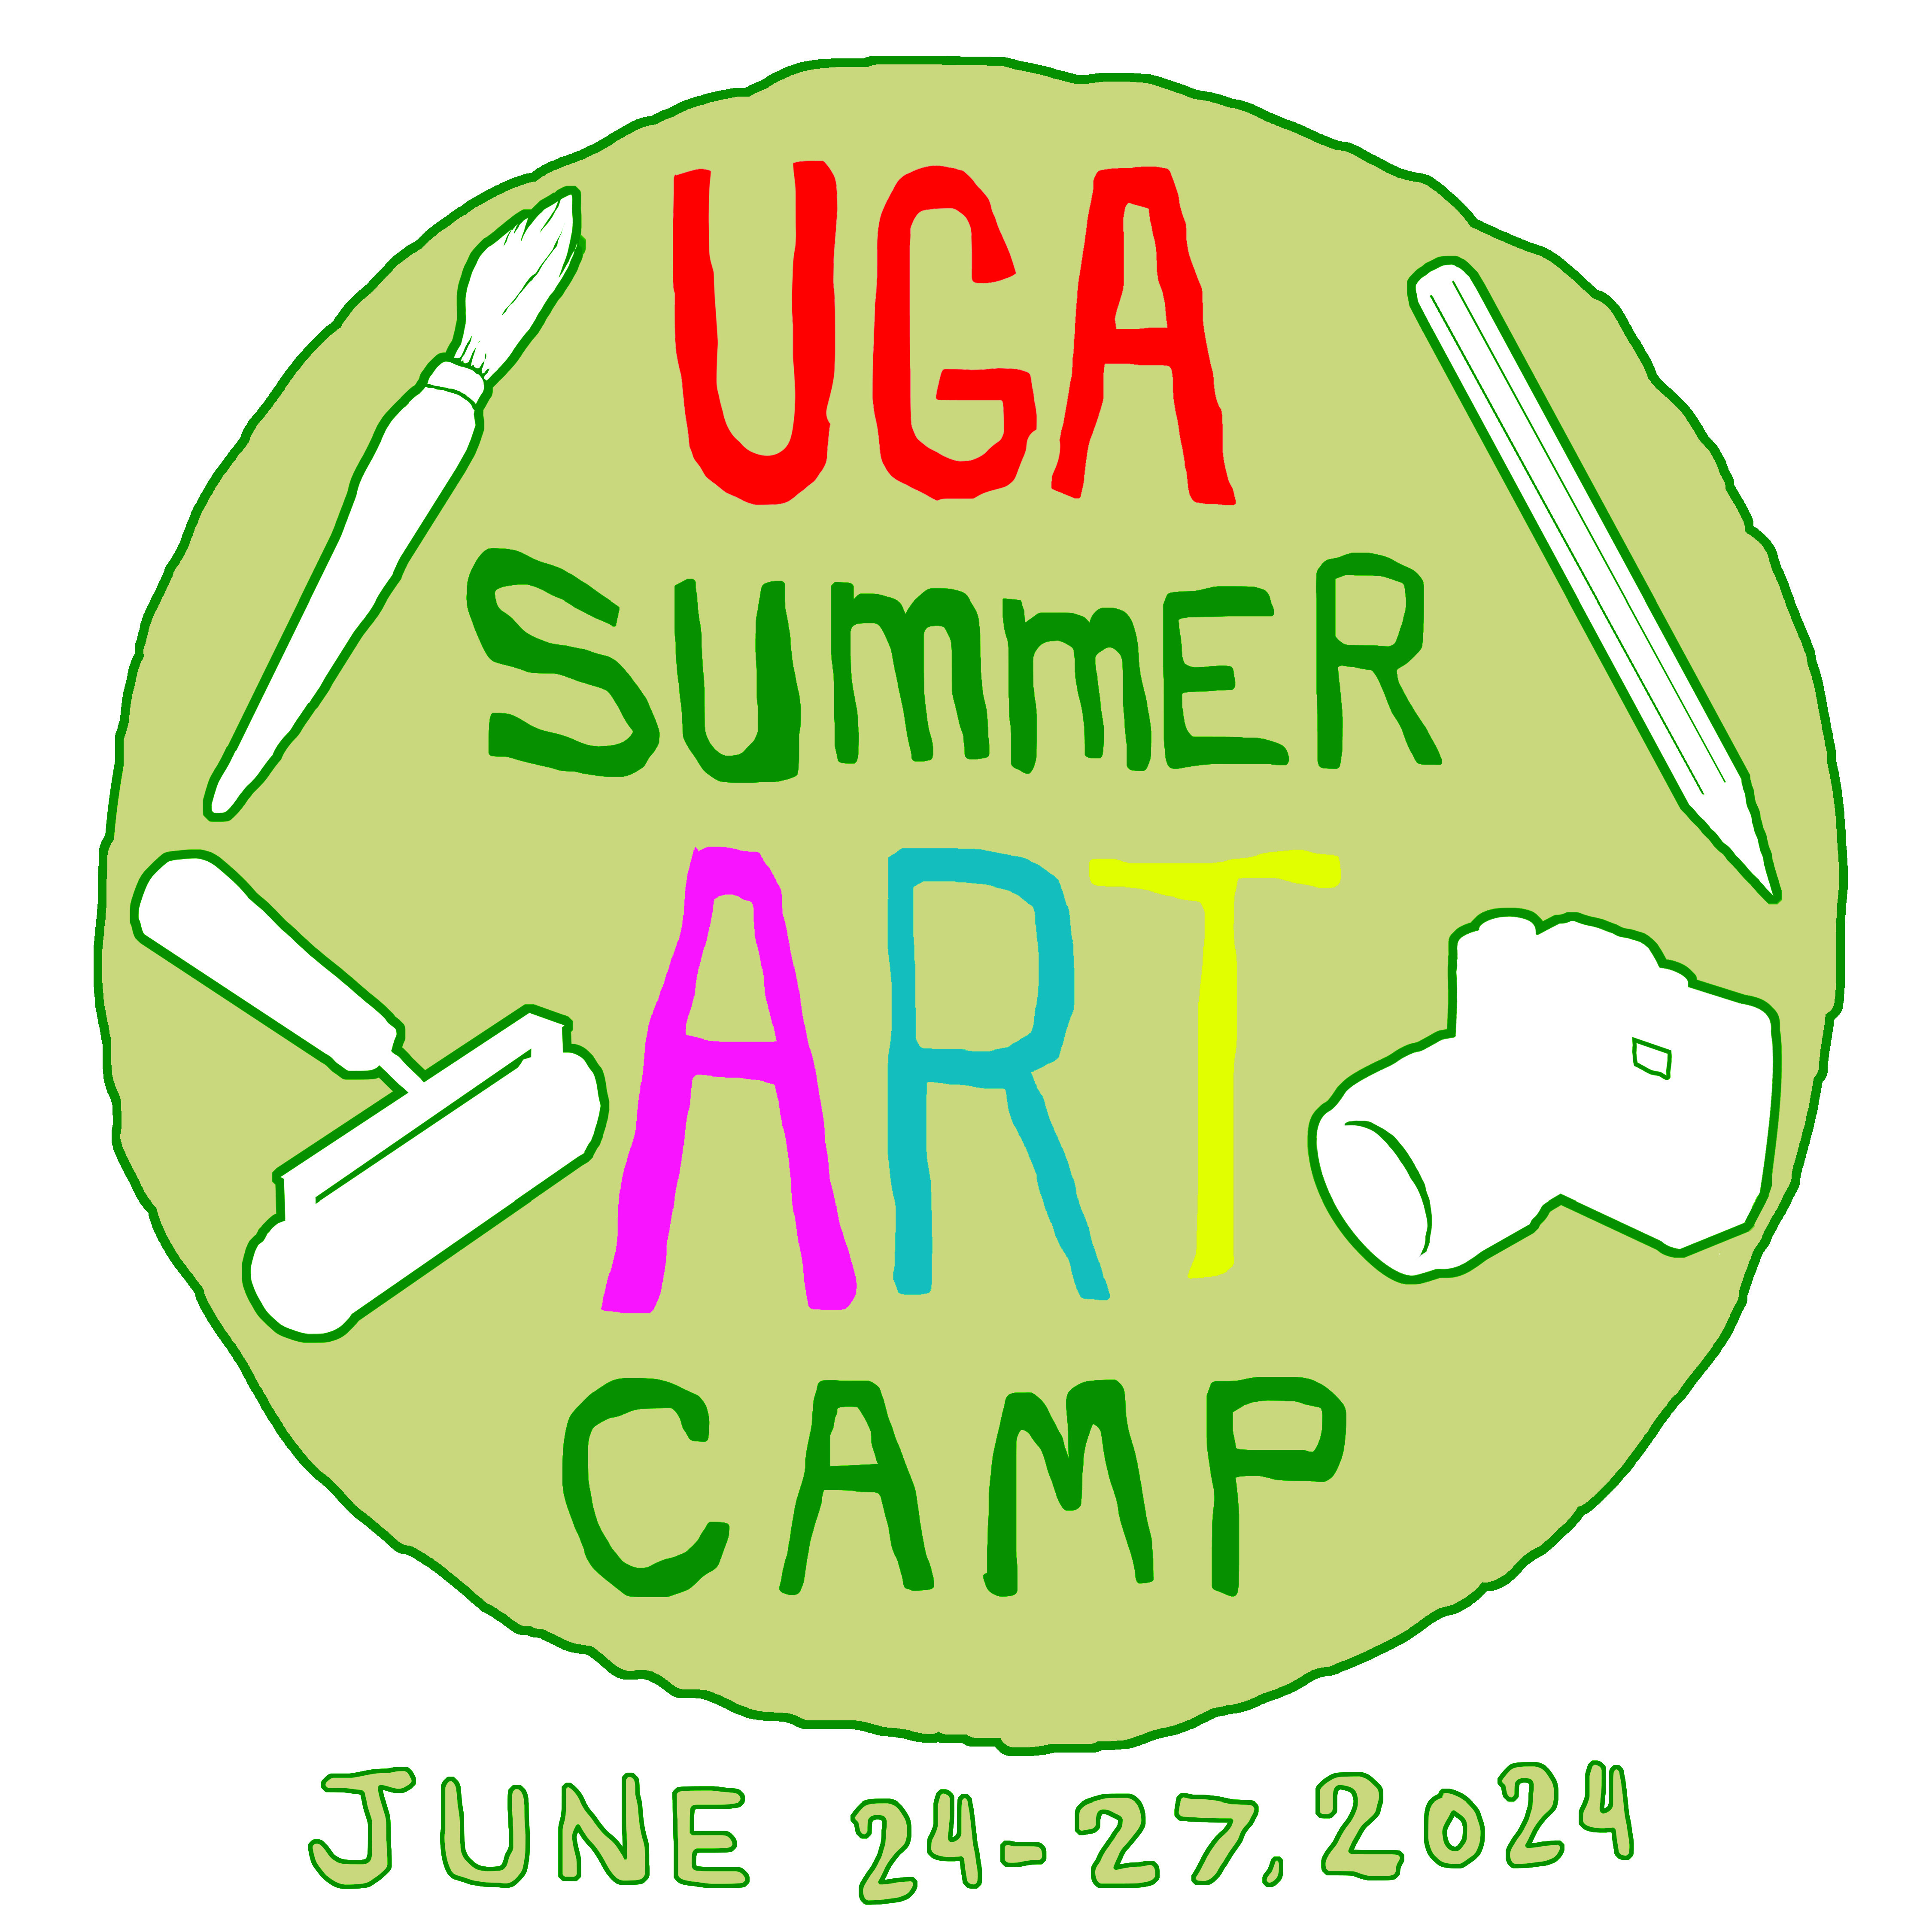 Summer Art Camp flyer. Forest green circle with colorful text and graphics of a camera, paintbrush, pencil, and print roller.